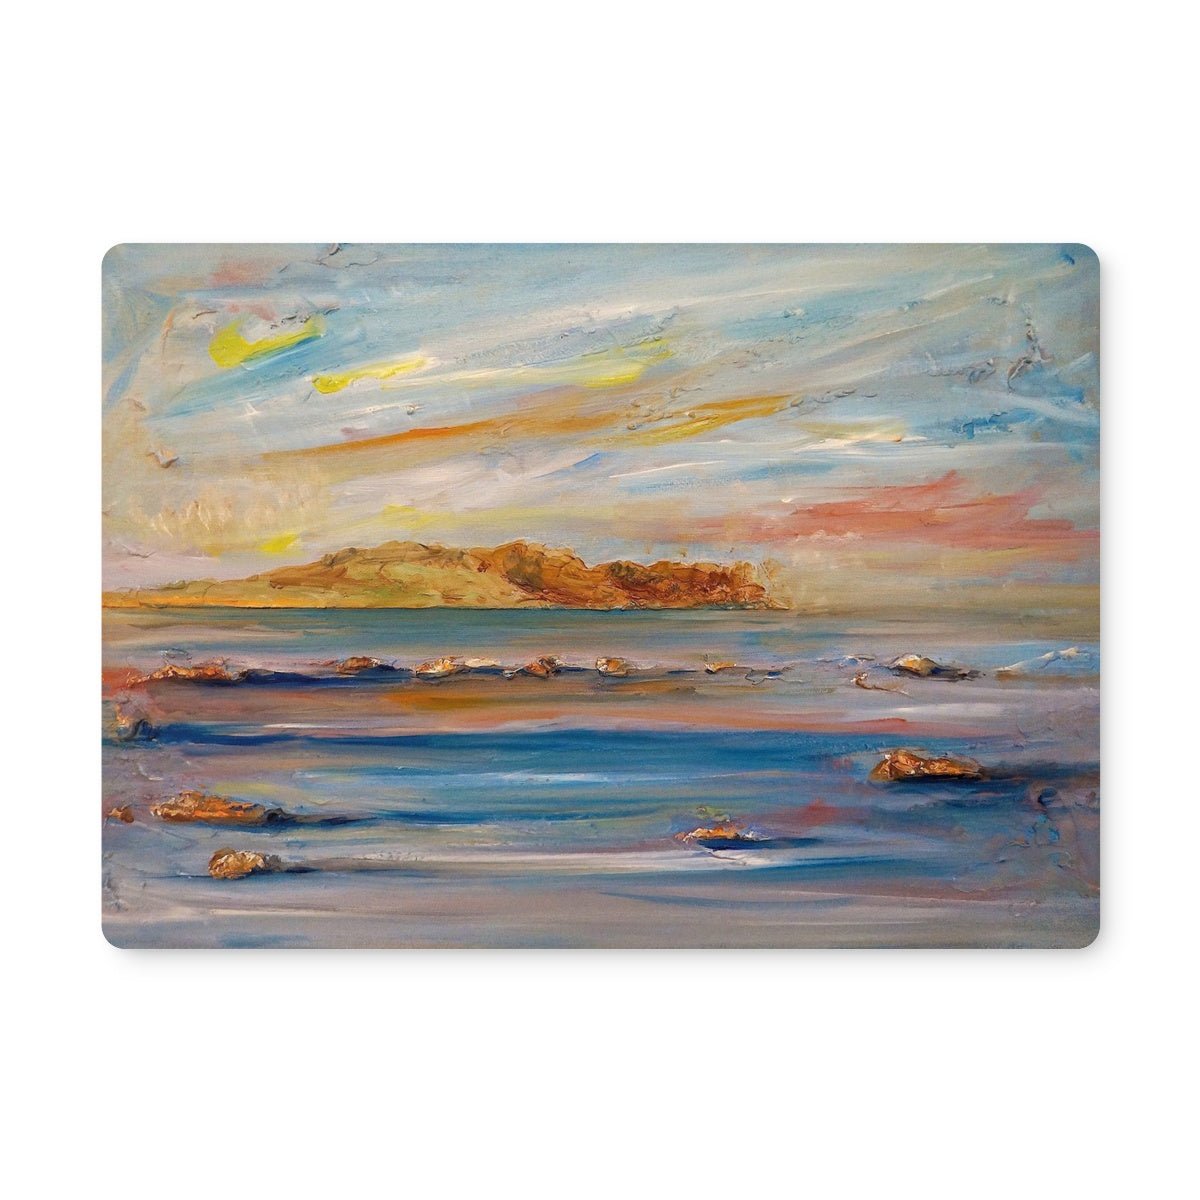 Tiree Dawn Art Gifts Placemat-Placemats-Hebridean Islands Art Gallery-2 Placemats-Paintings, Prints, Homeware, Art Gifts From Scotland By Scottish Artist Kevin Hunter